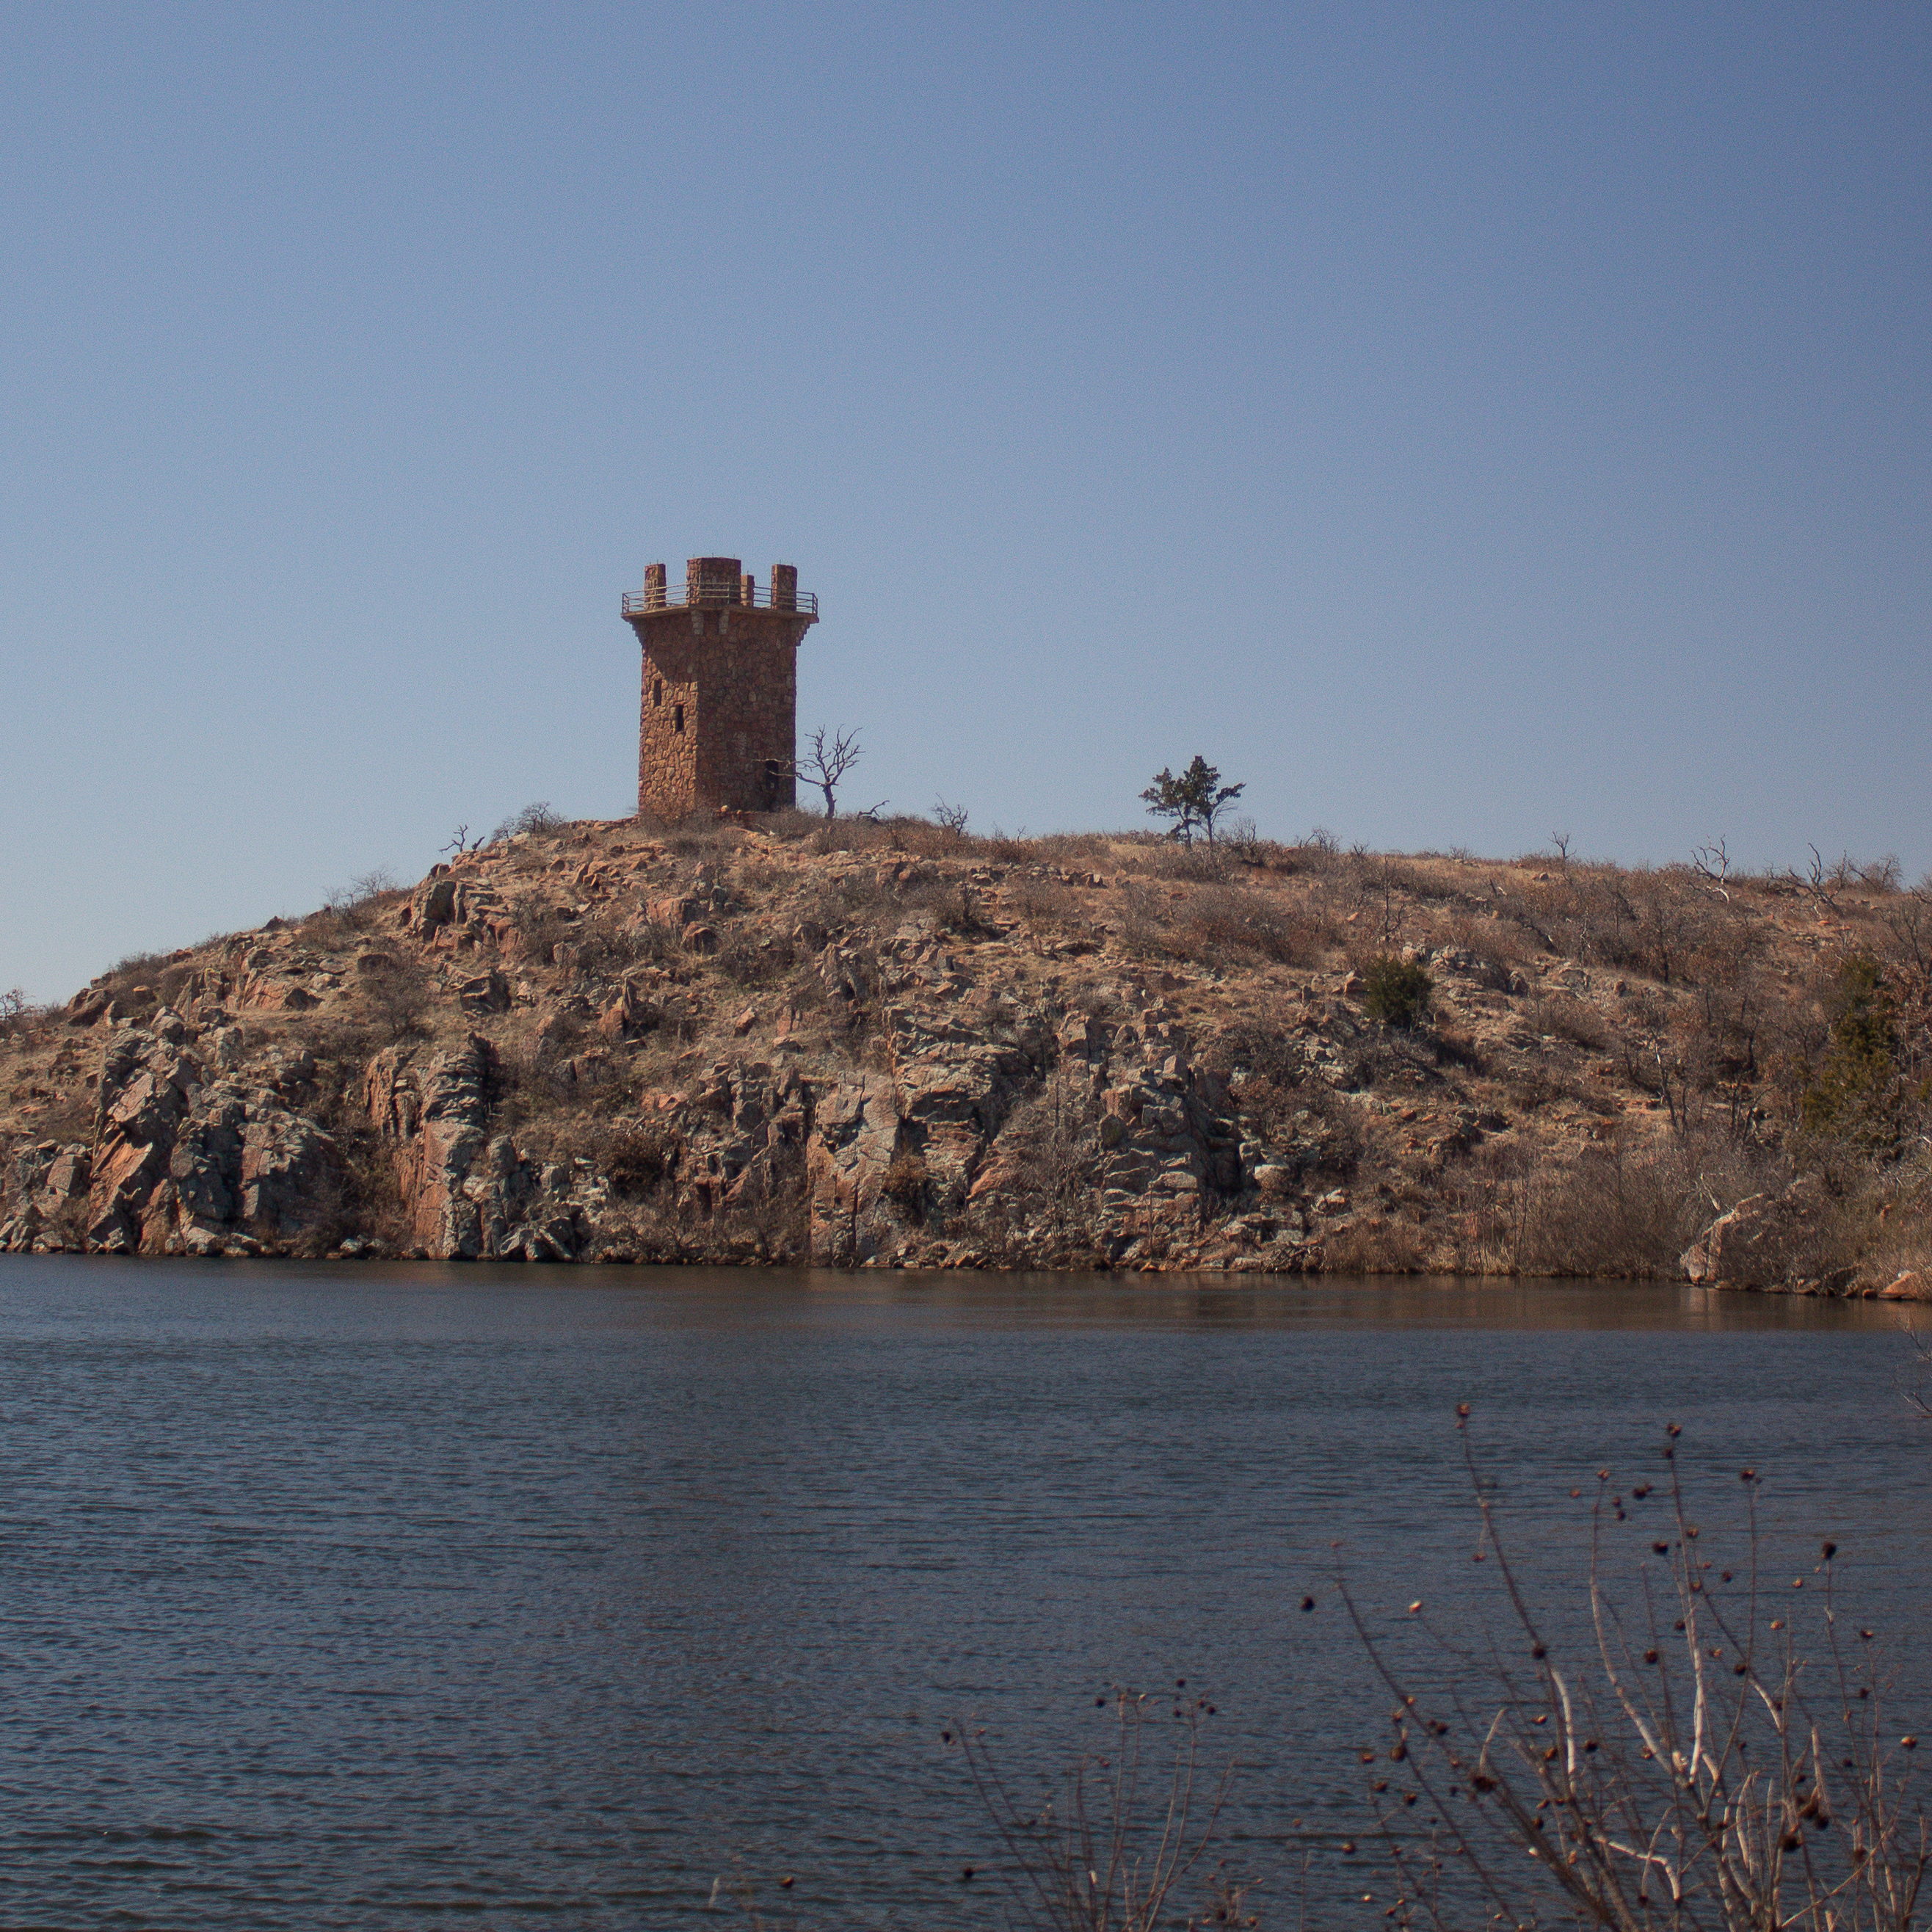 The definitive guide to the Wichita Mountains Wildlife Refuge